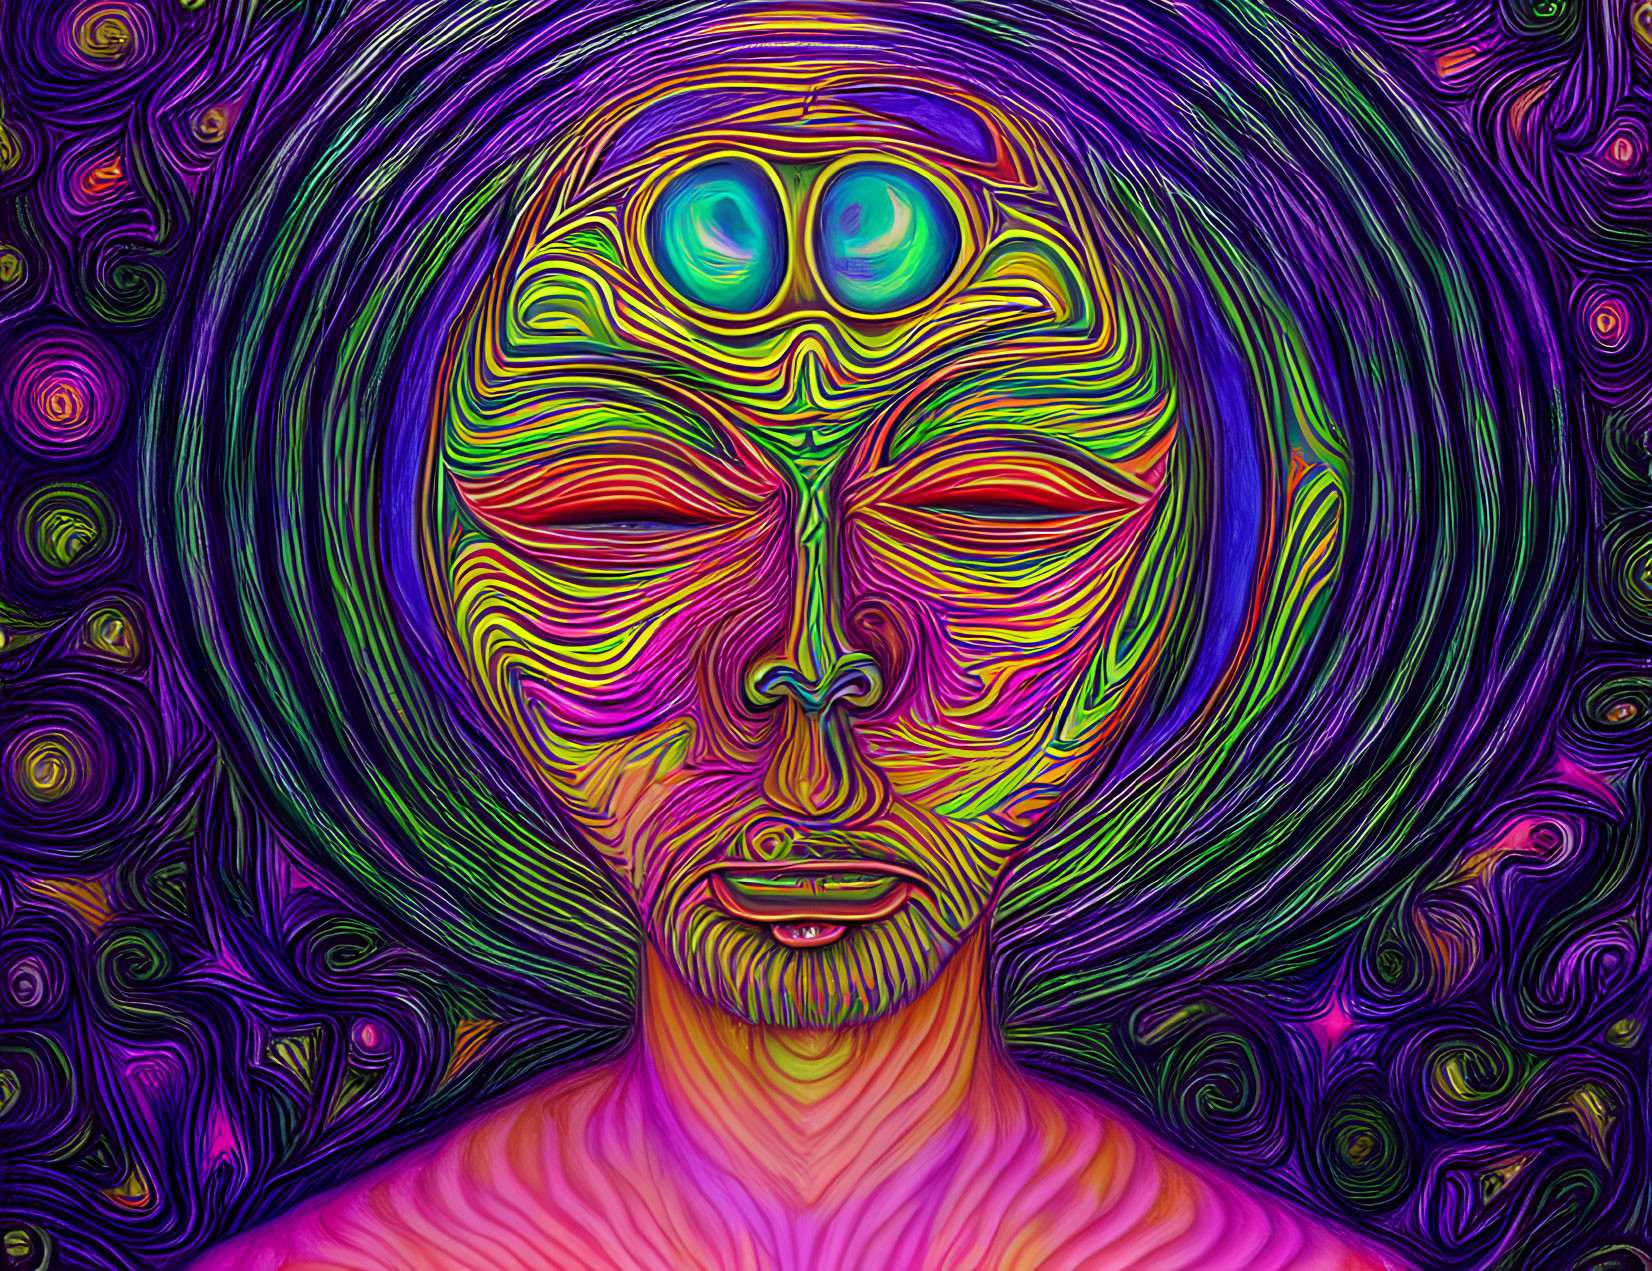 Colorful digital artwork: Human face with closed eyes and third eye, surrounded by psychedelic patterns